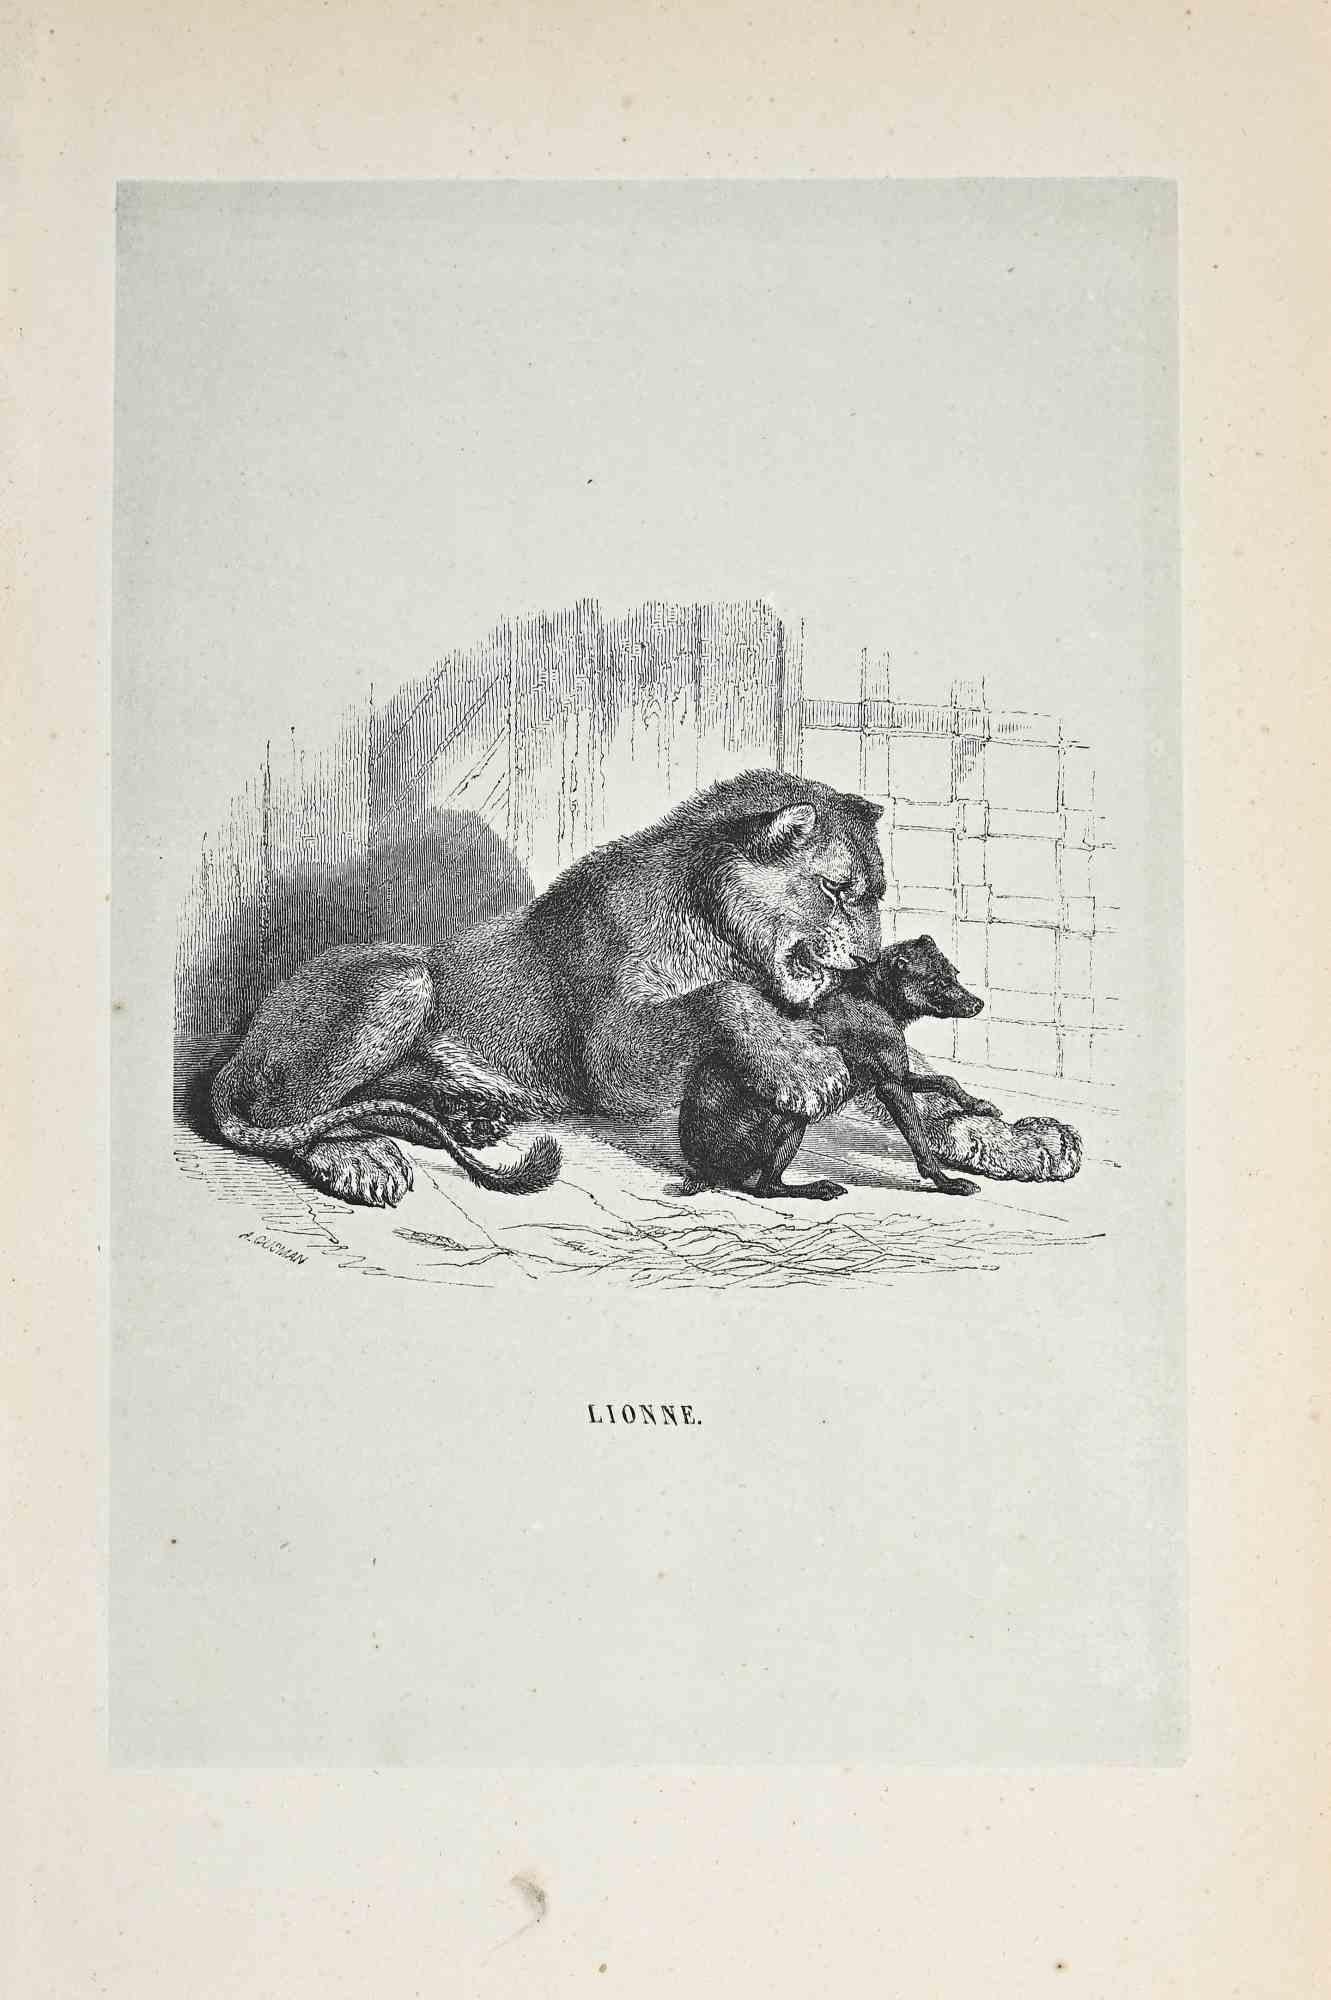 The Lion is an original lithograph on ivory-colored paper, realized by Paul Gervais (1816-1879). The artwork is from The Series of "Les Trois Règnes de la Nature", and was published in 1854.

Good conditions with minor foxing.

Titled on the